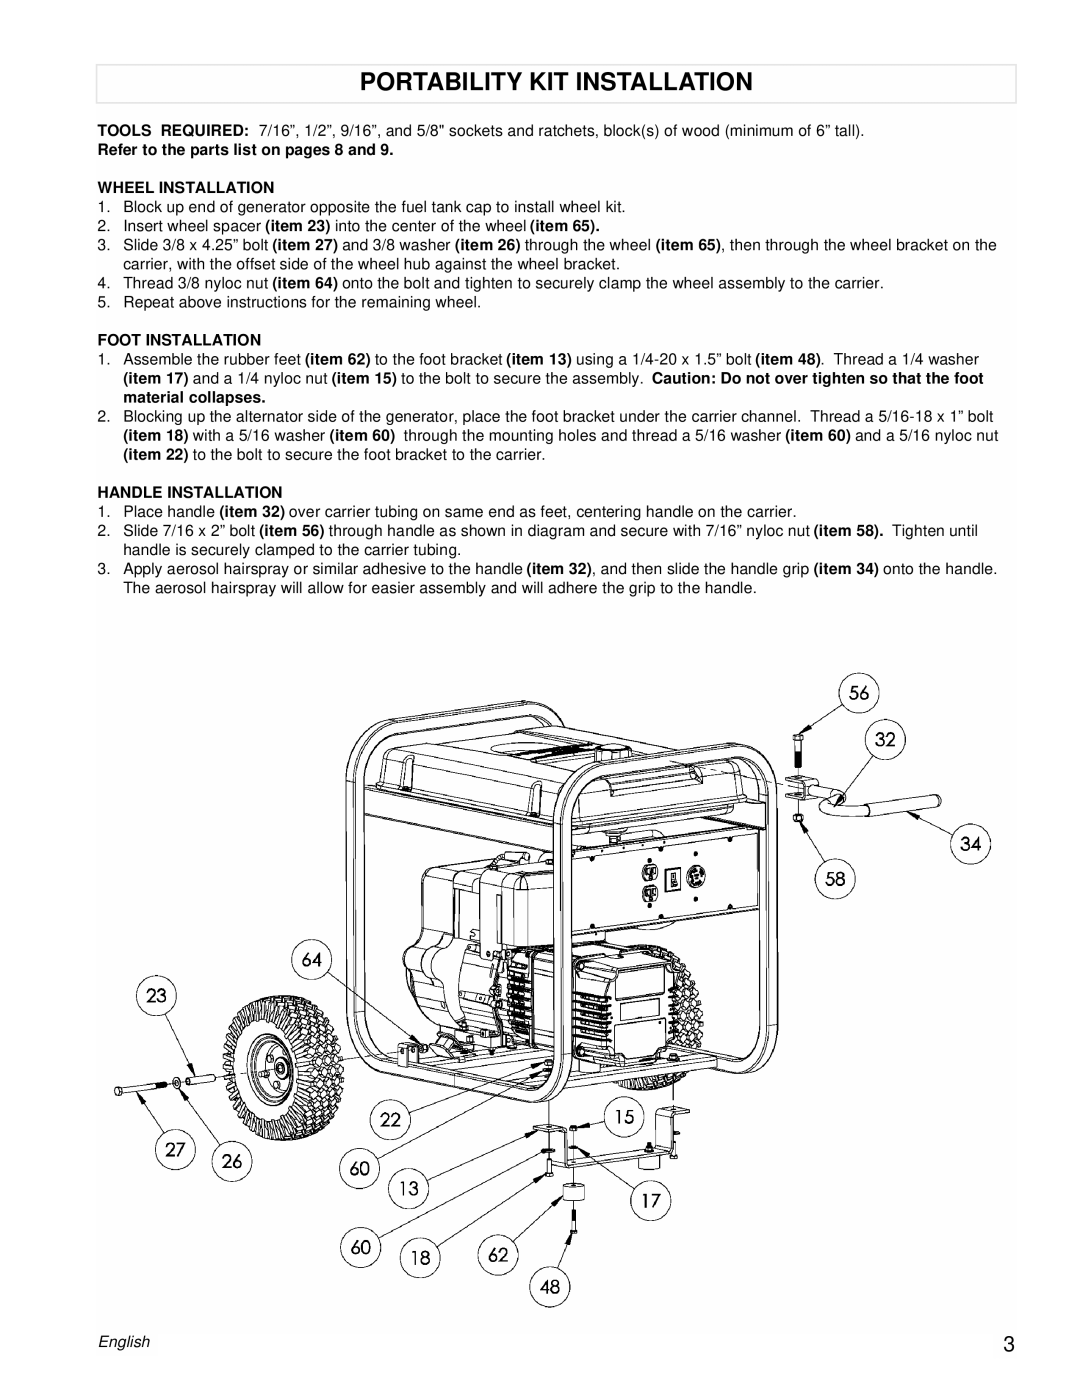 Powermate PC0525304 Portability Kit Installation, Refer to the parts list on pages 8 and, Wheel Installation, English 